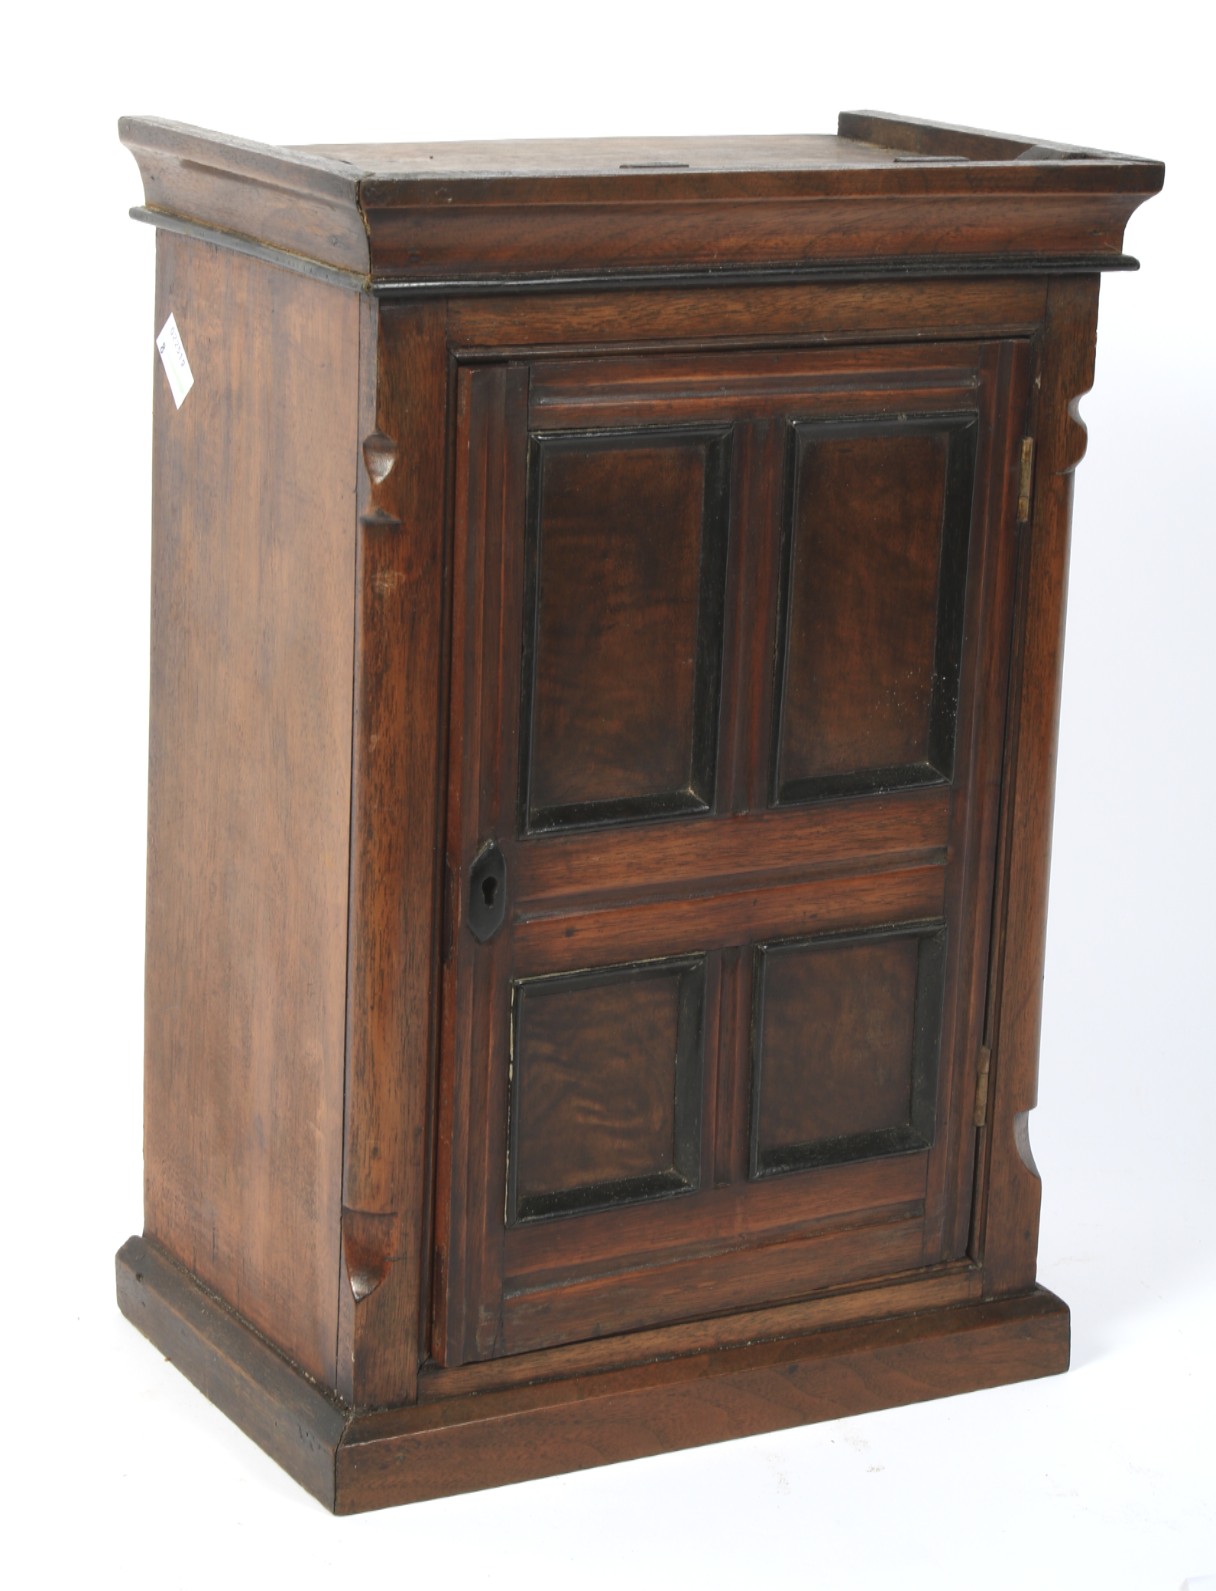 A 19th century mahogany table top cabinet in the form of a cupboard.